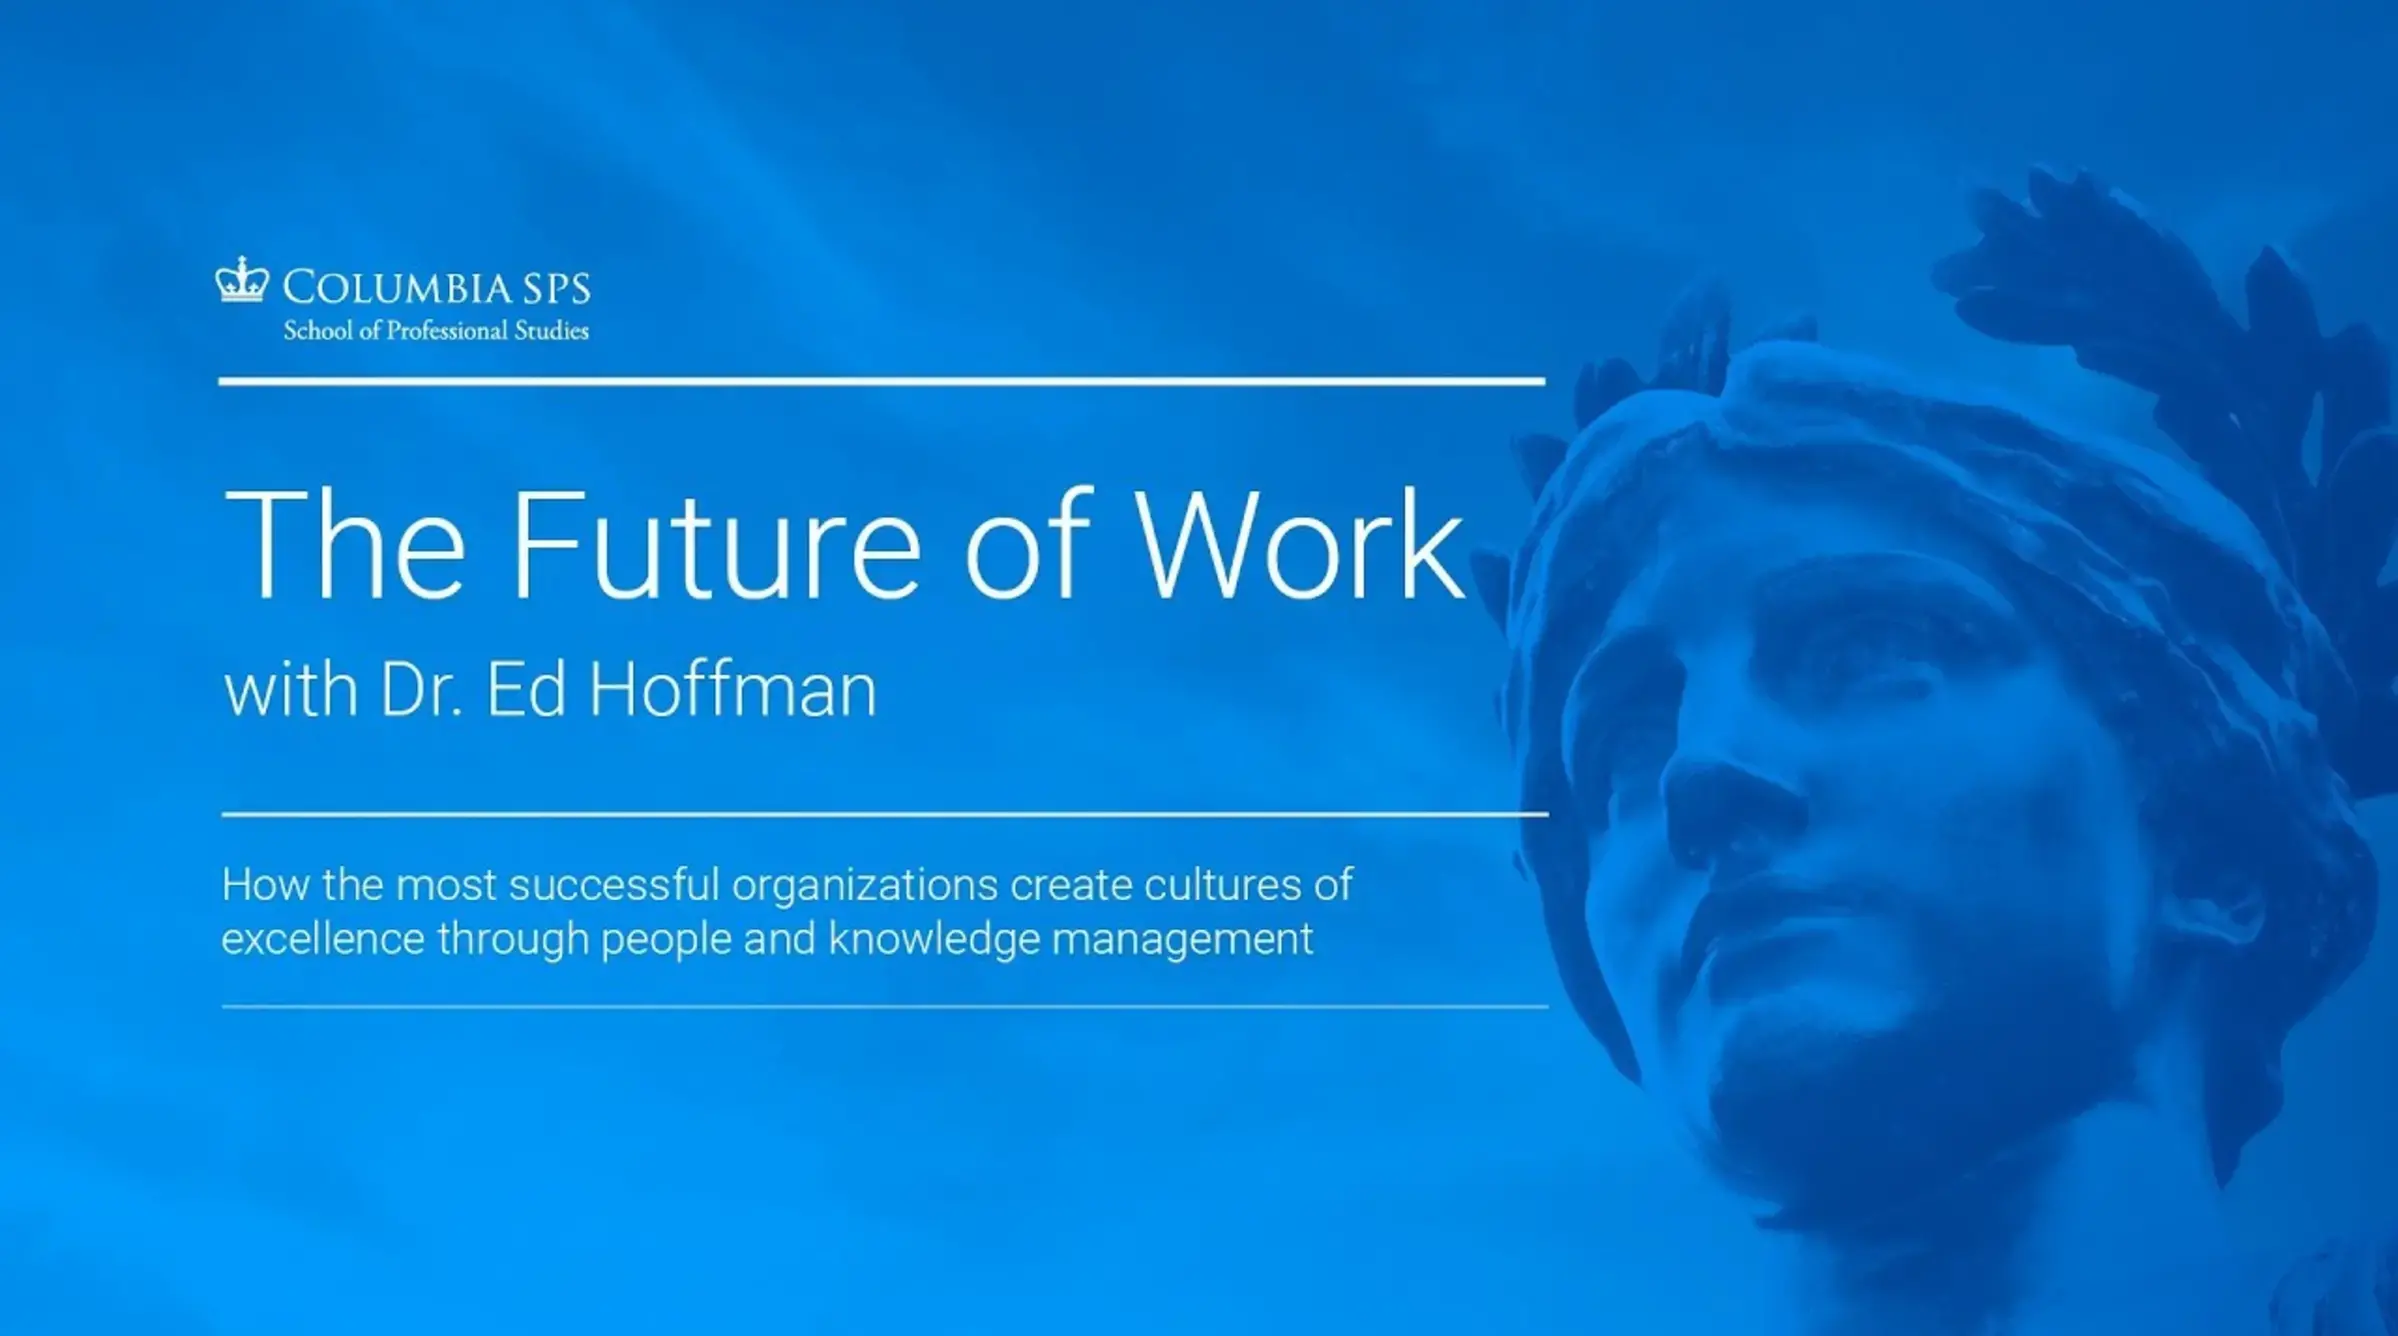 The Future of Work with Ed Hoffman, Ph.D.